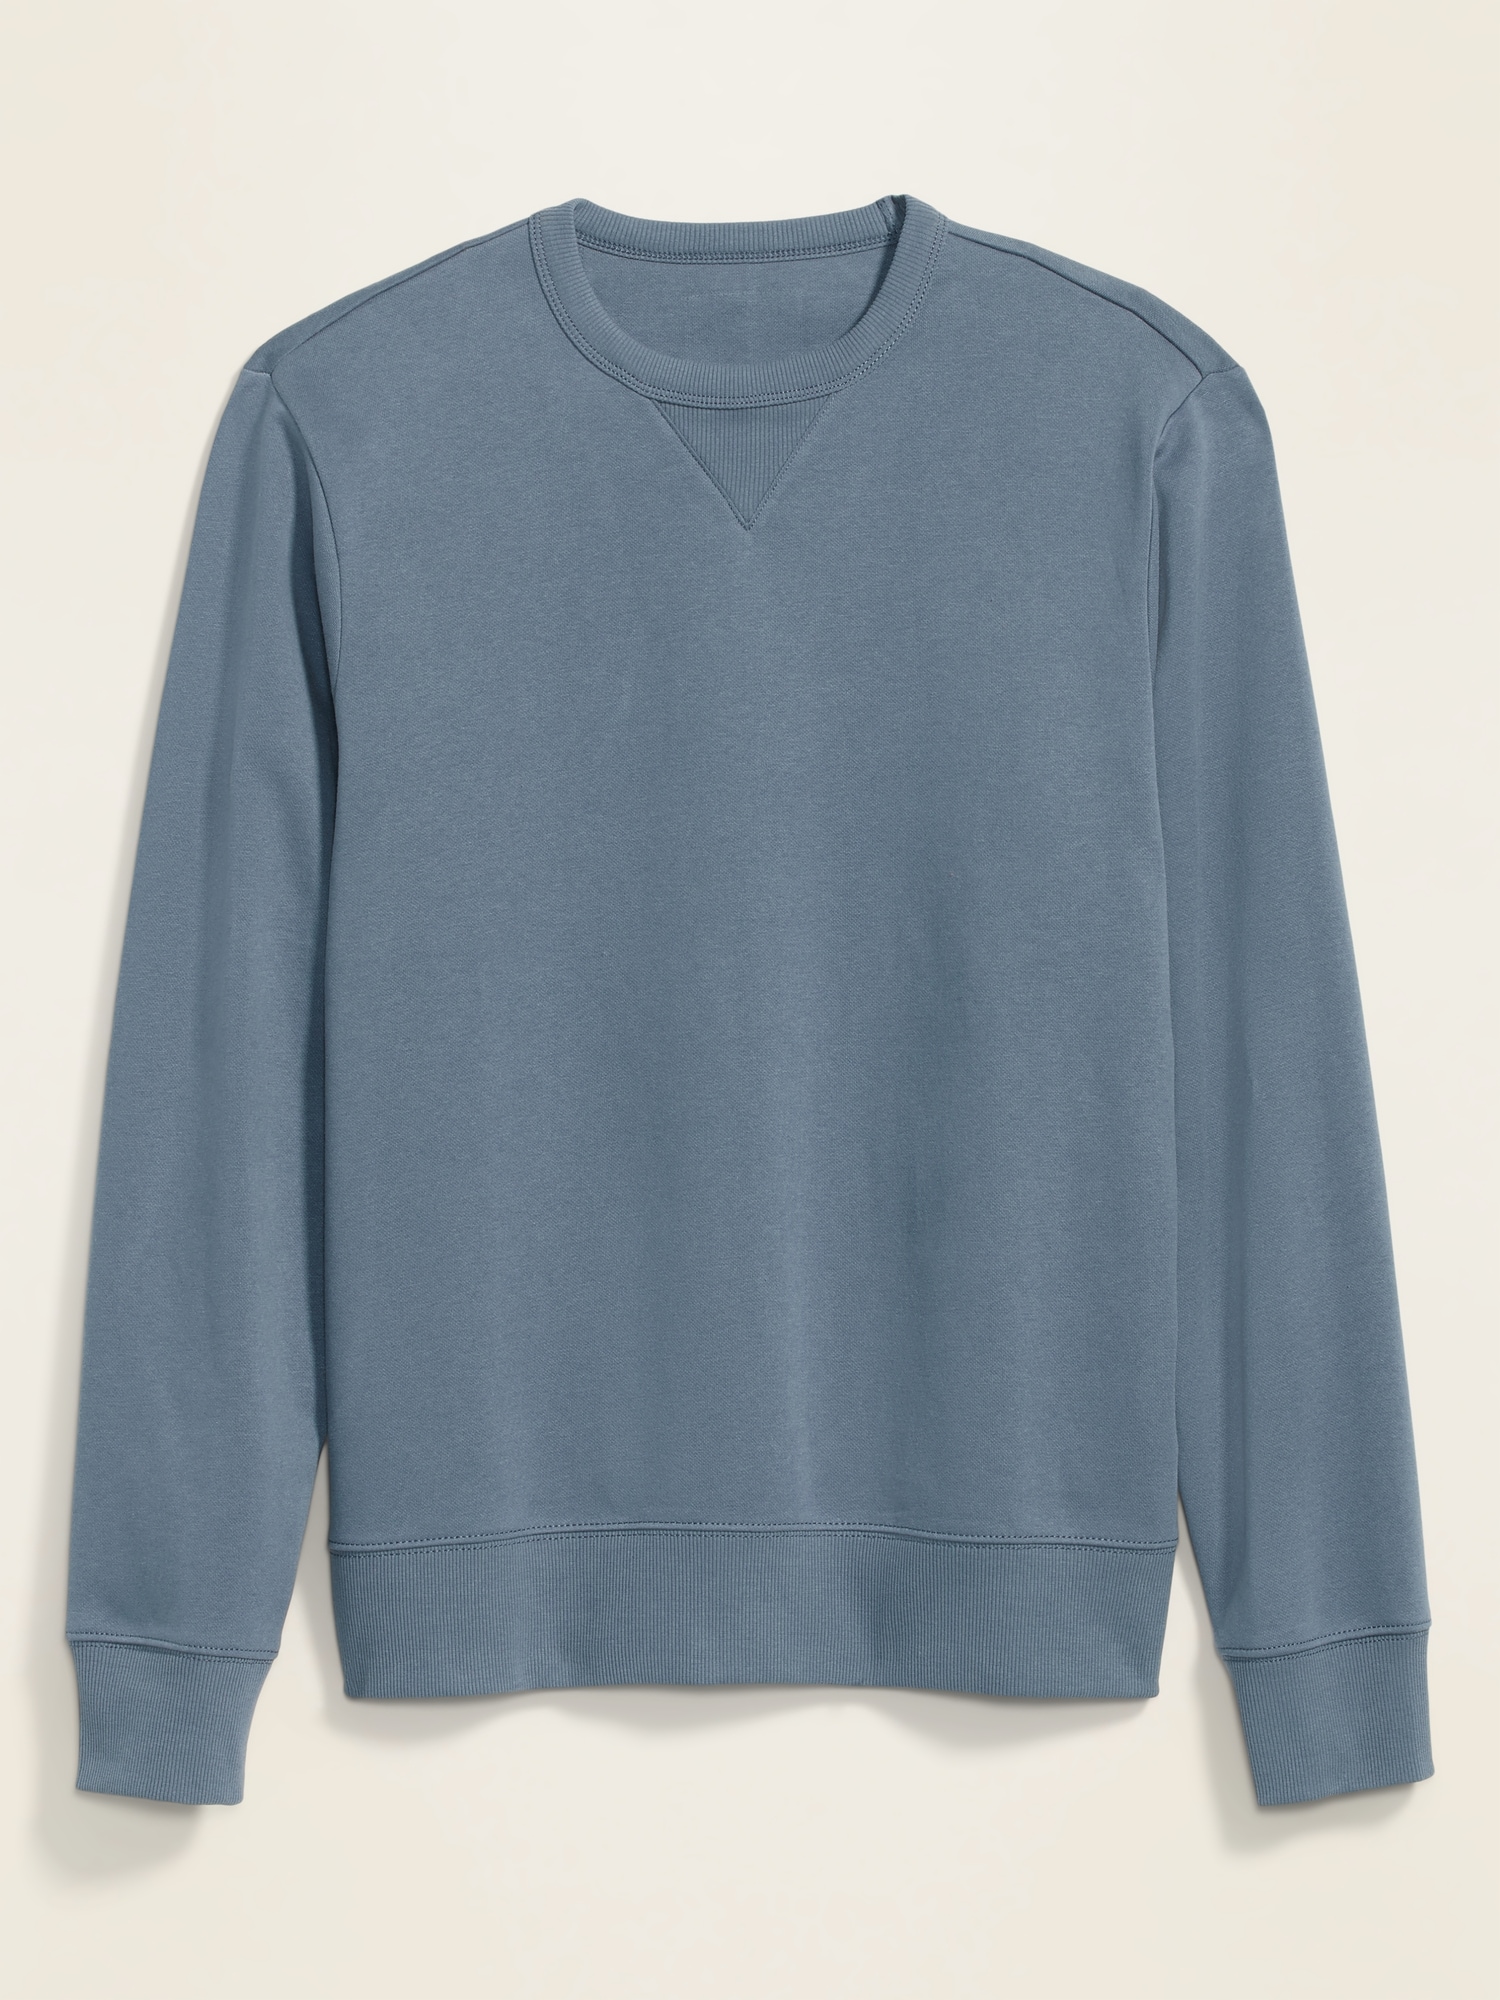 Soft-Washed Crew-Neck Gender-Neutral Sweatshirt for Adults | Old Navy